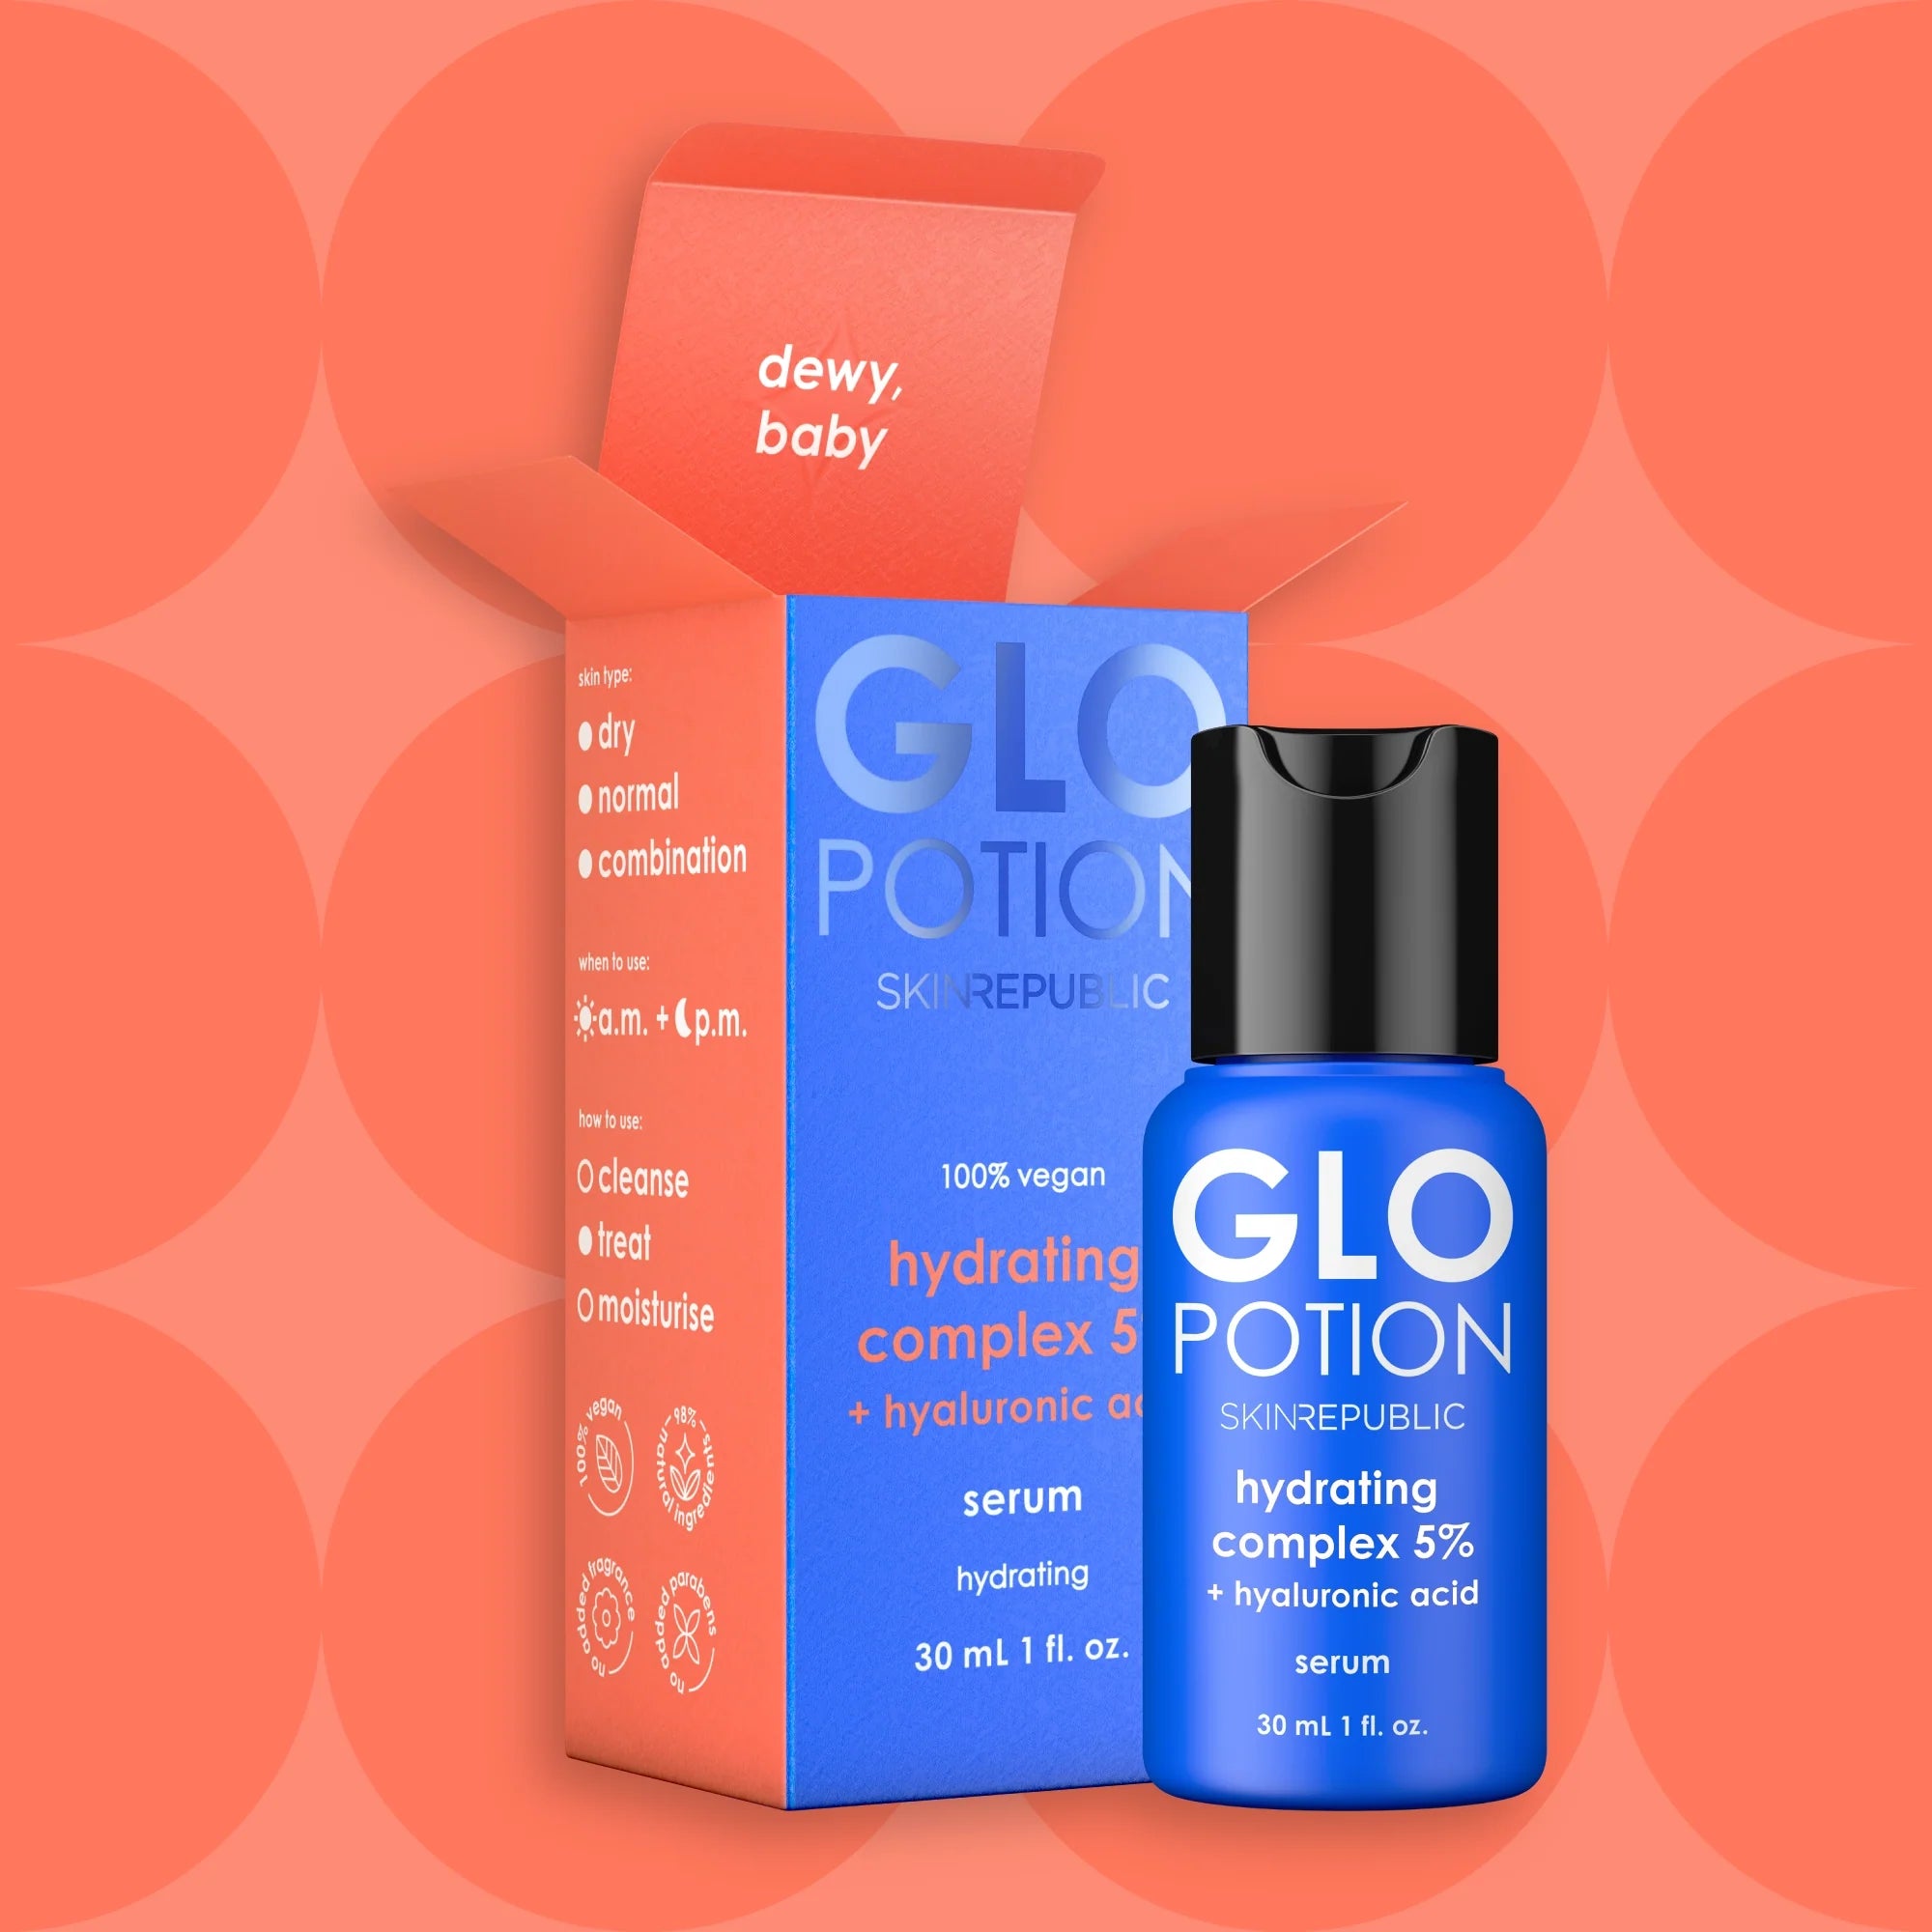 GloPotion hydrating complex 5% + hyaluronic acid serum